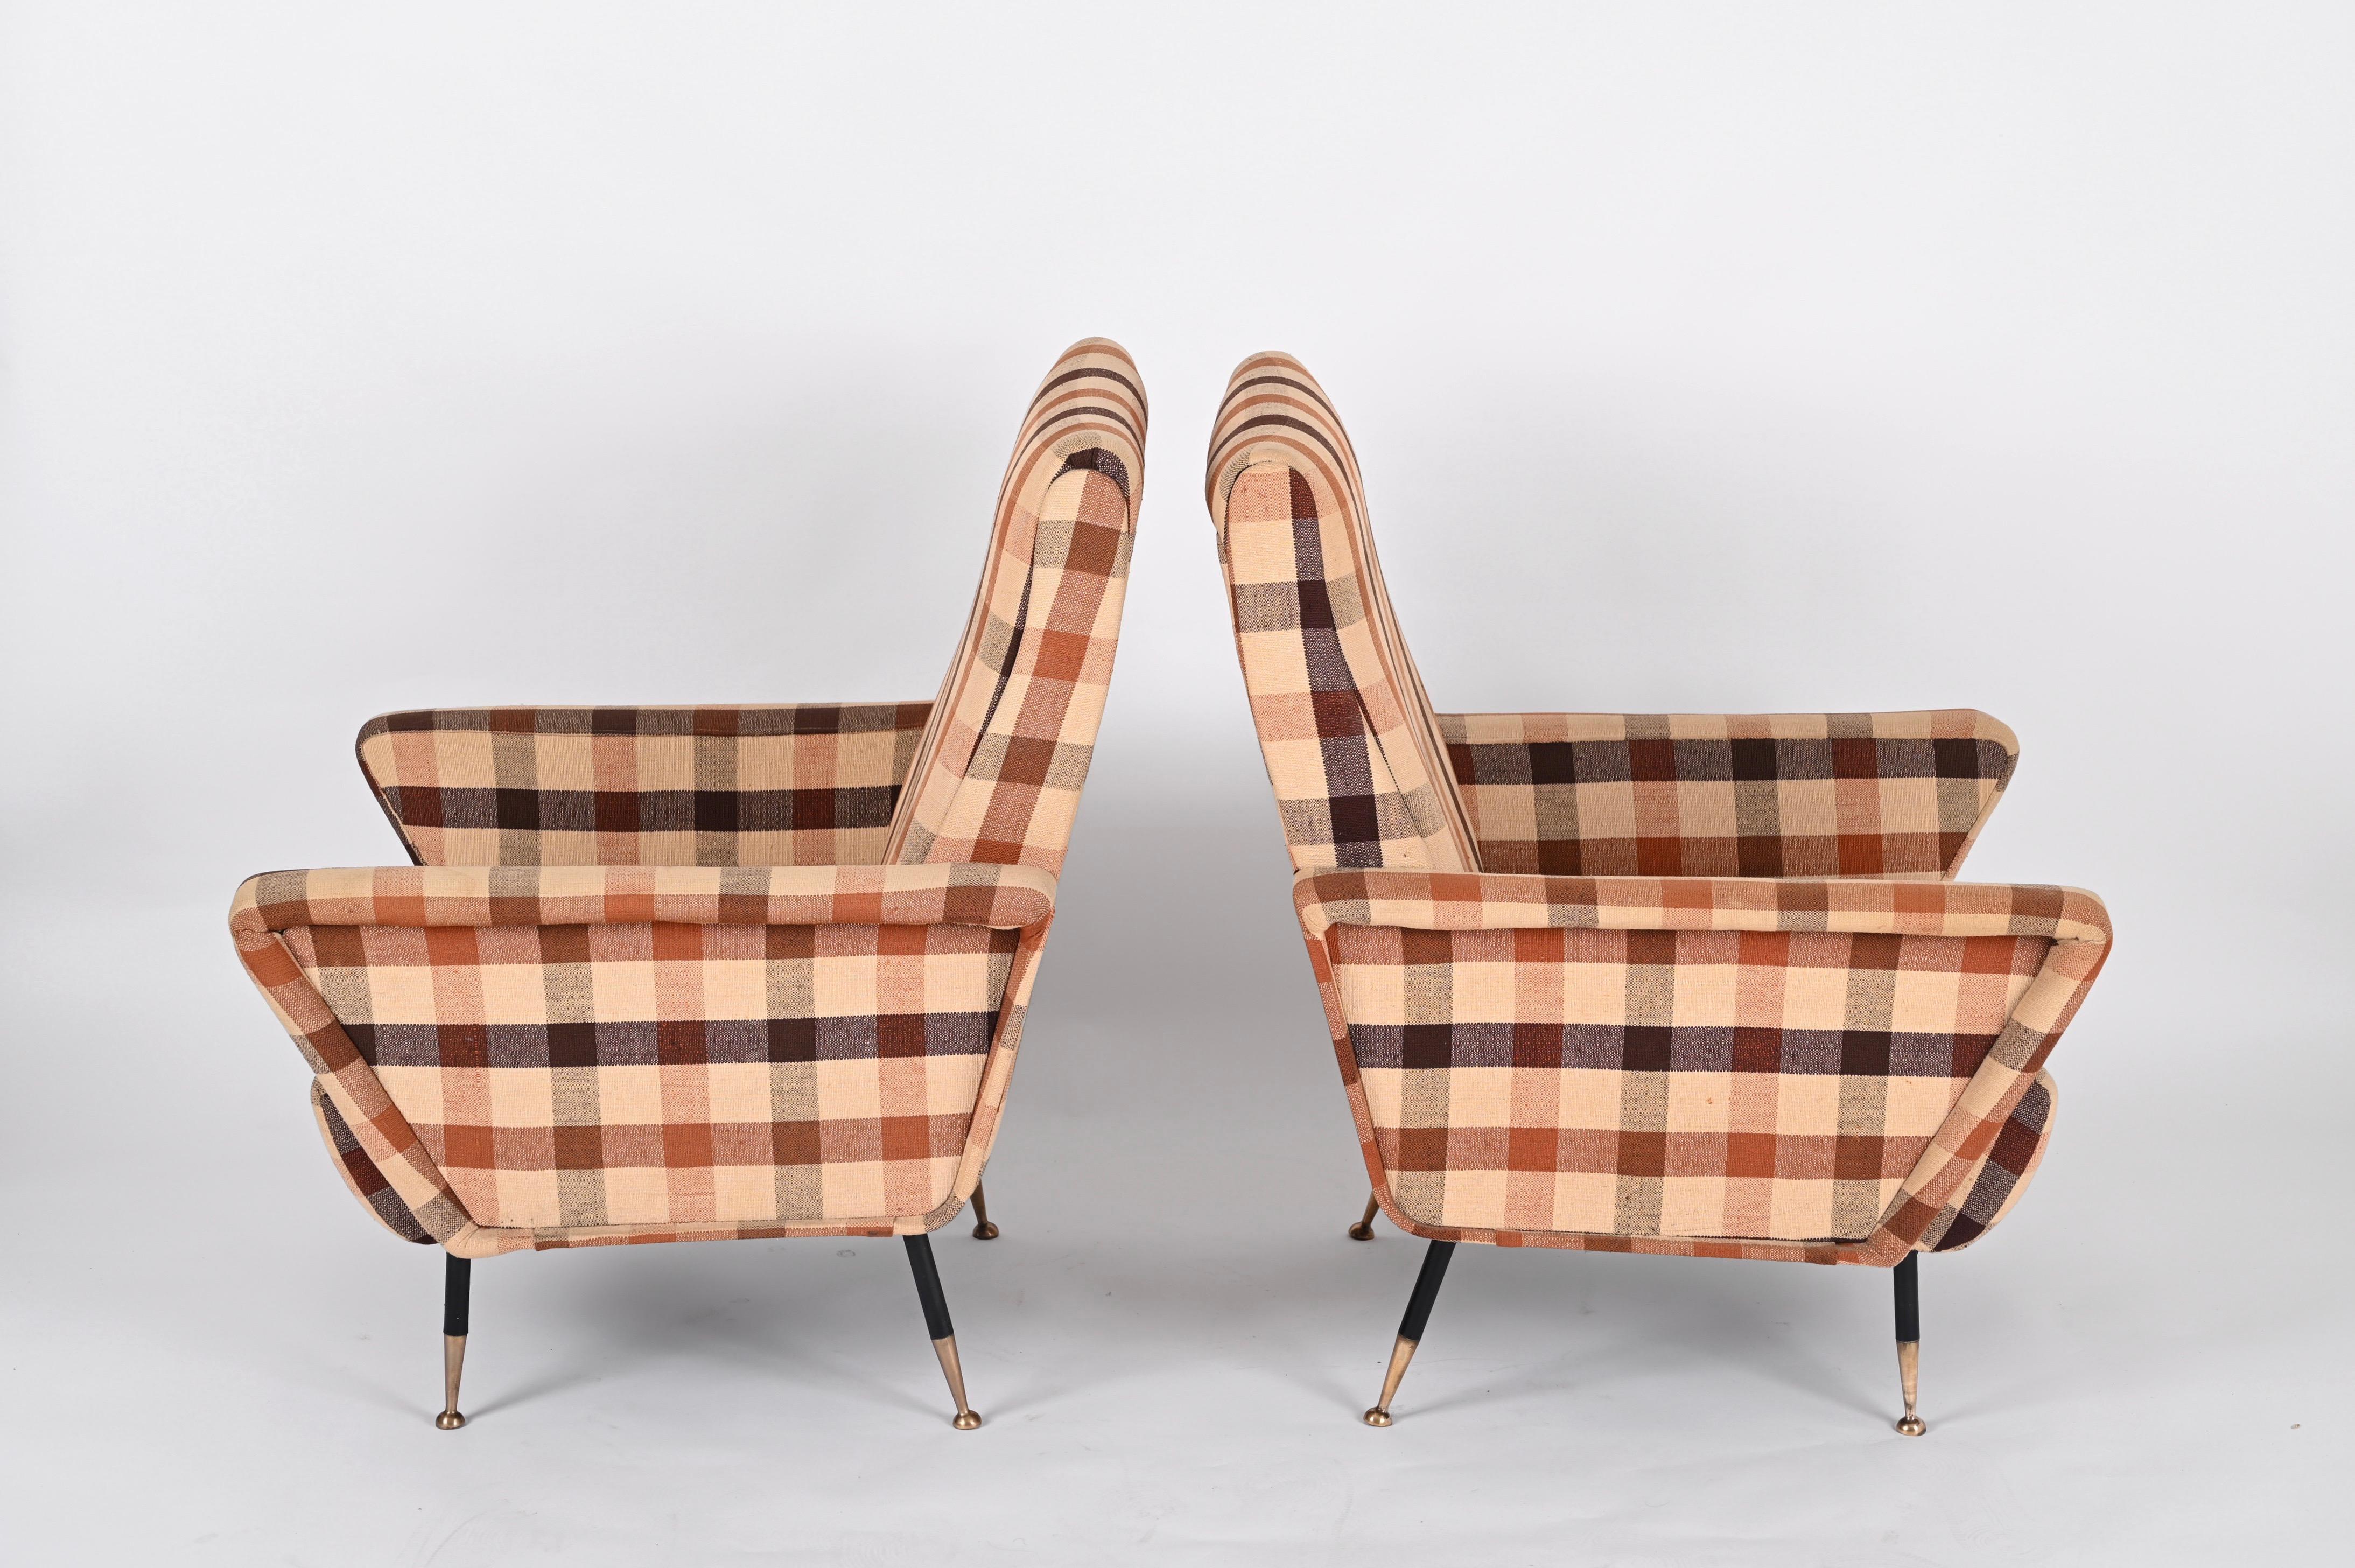 Italian Marco Zanuso Pair of Armchairs, Check Fabric, Brass and Metal, Italy 1950s For Sale